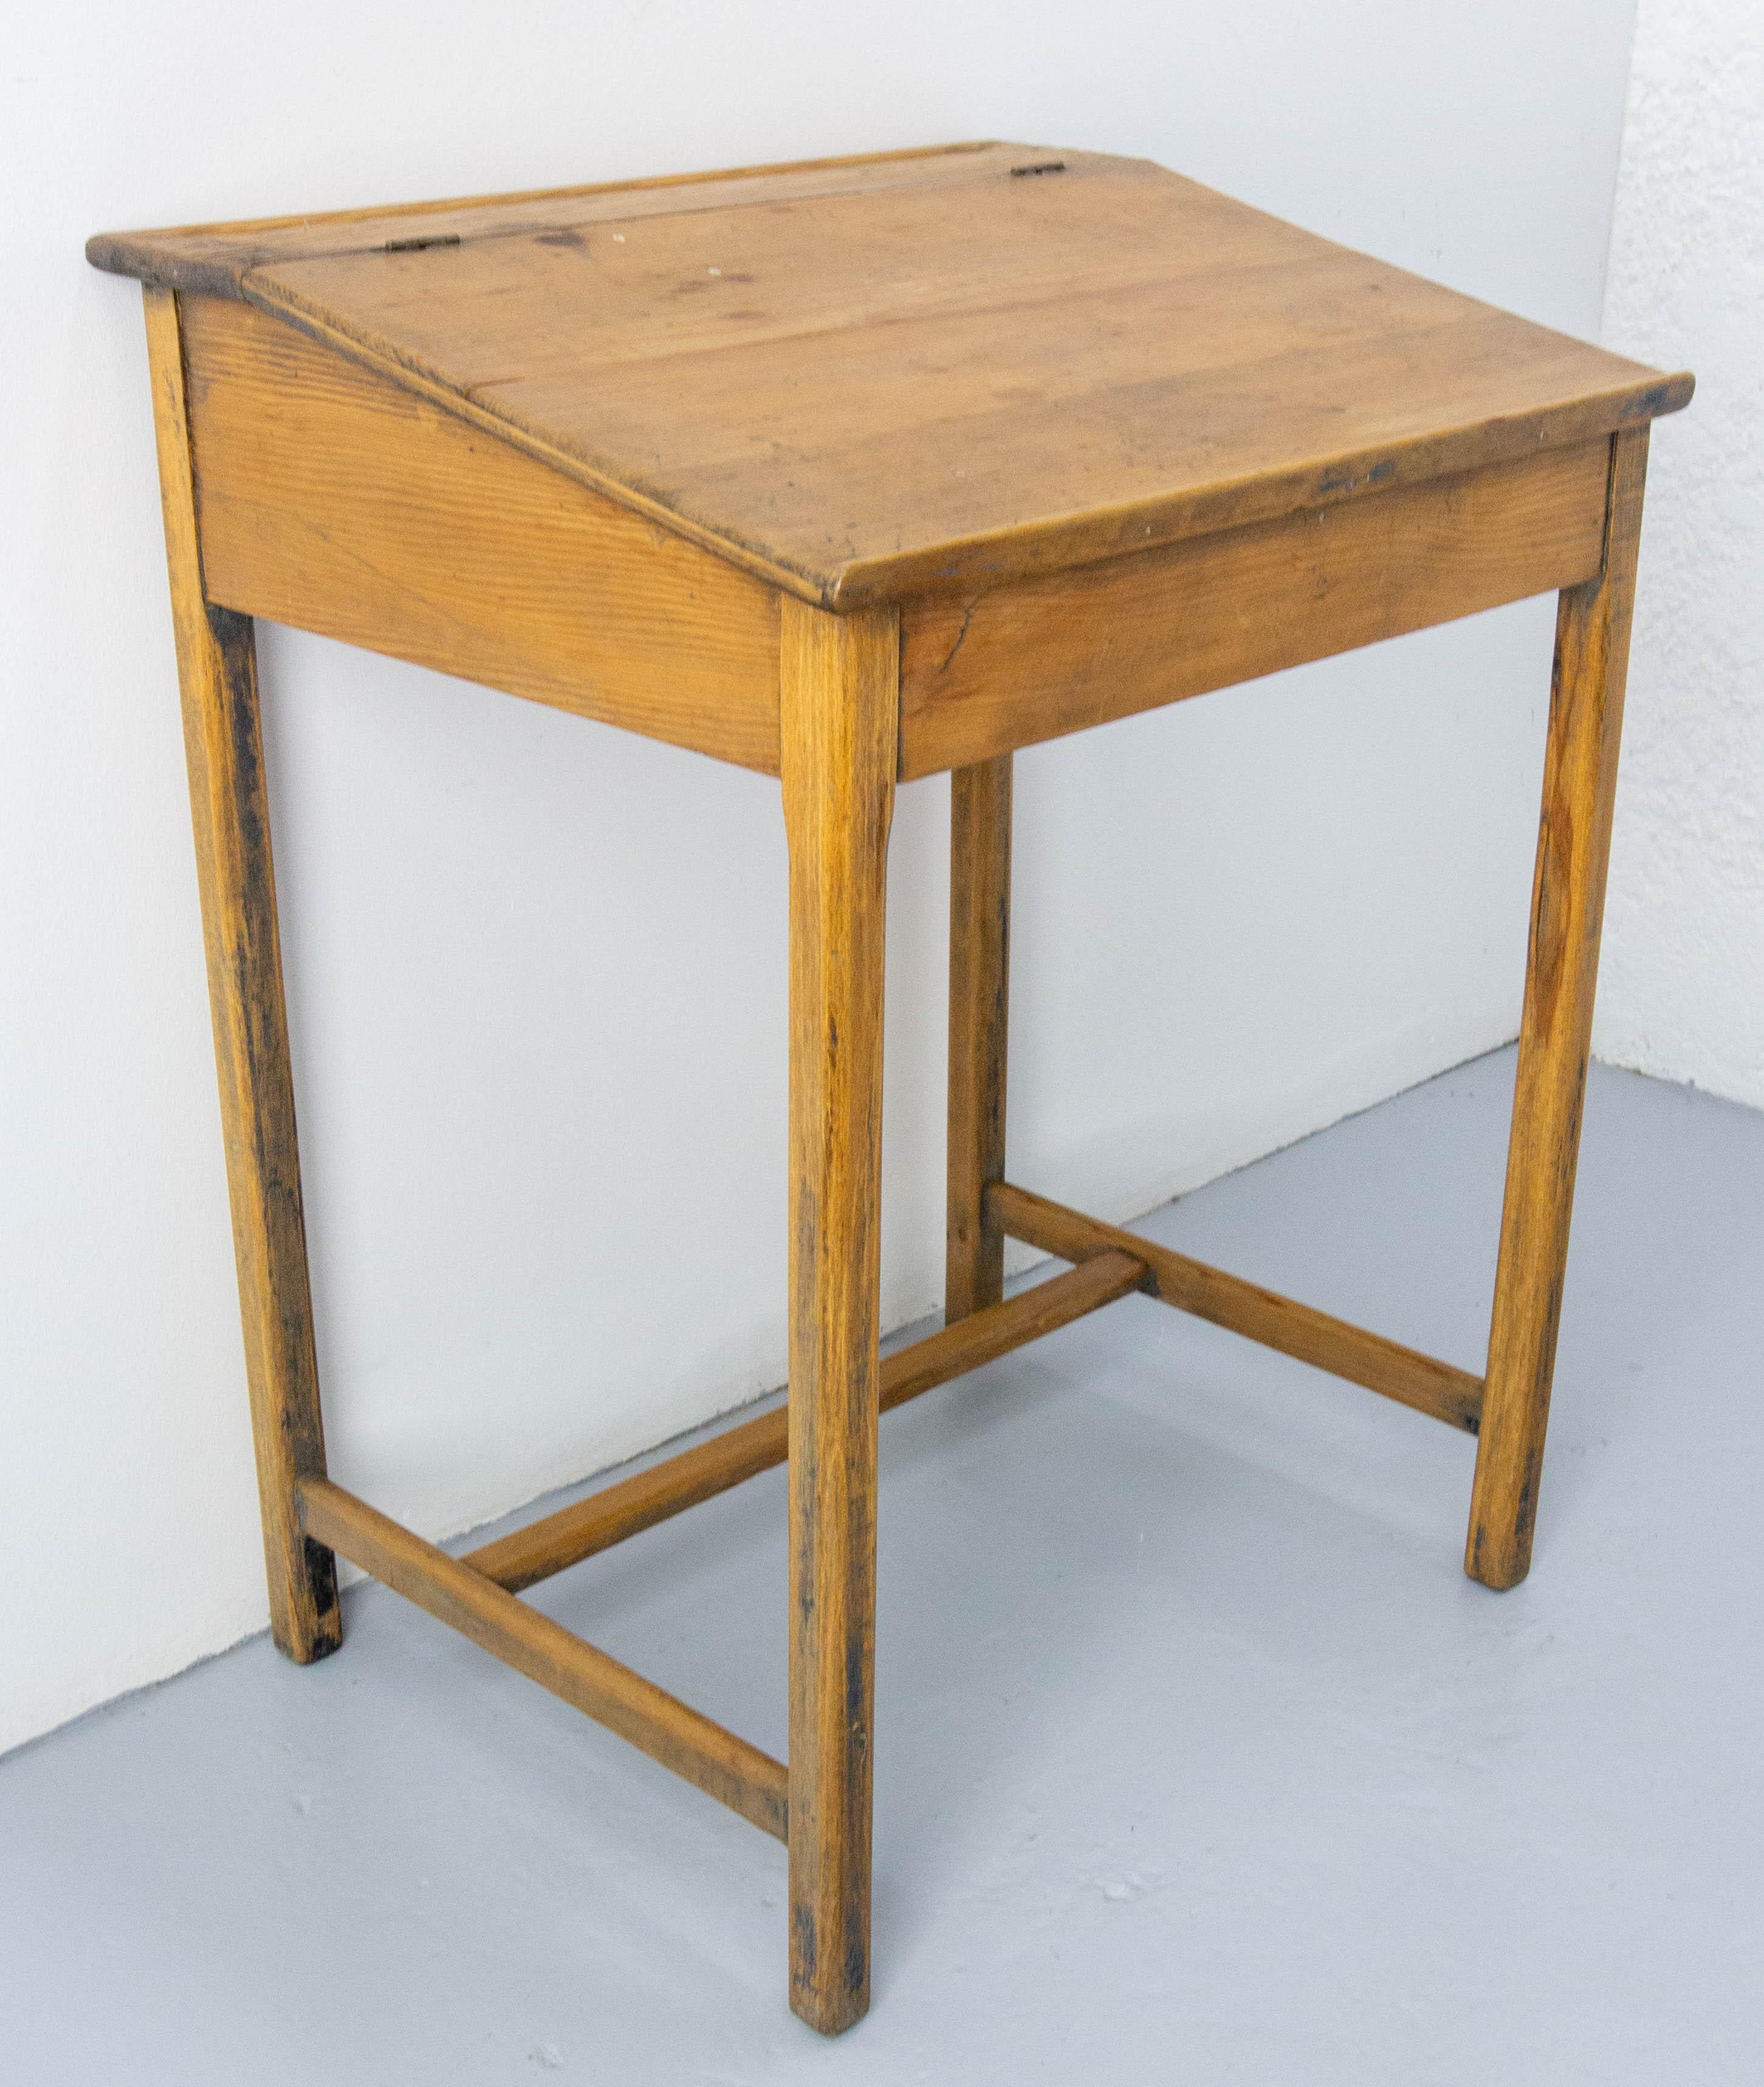 French slant top desk writing table for student, circa 1950.
Pine pupitre 
Good antique condition with nice patina.
Authentic condition with engraved marks made by the students during lessons !

Shipping:
46 / 55 / 71 cm 5 kg